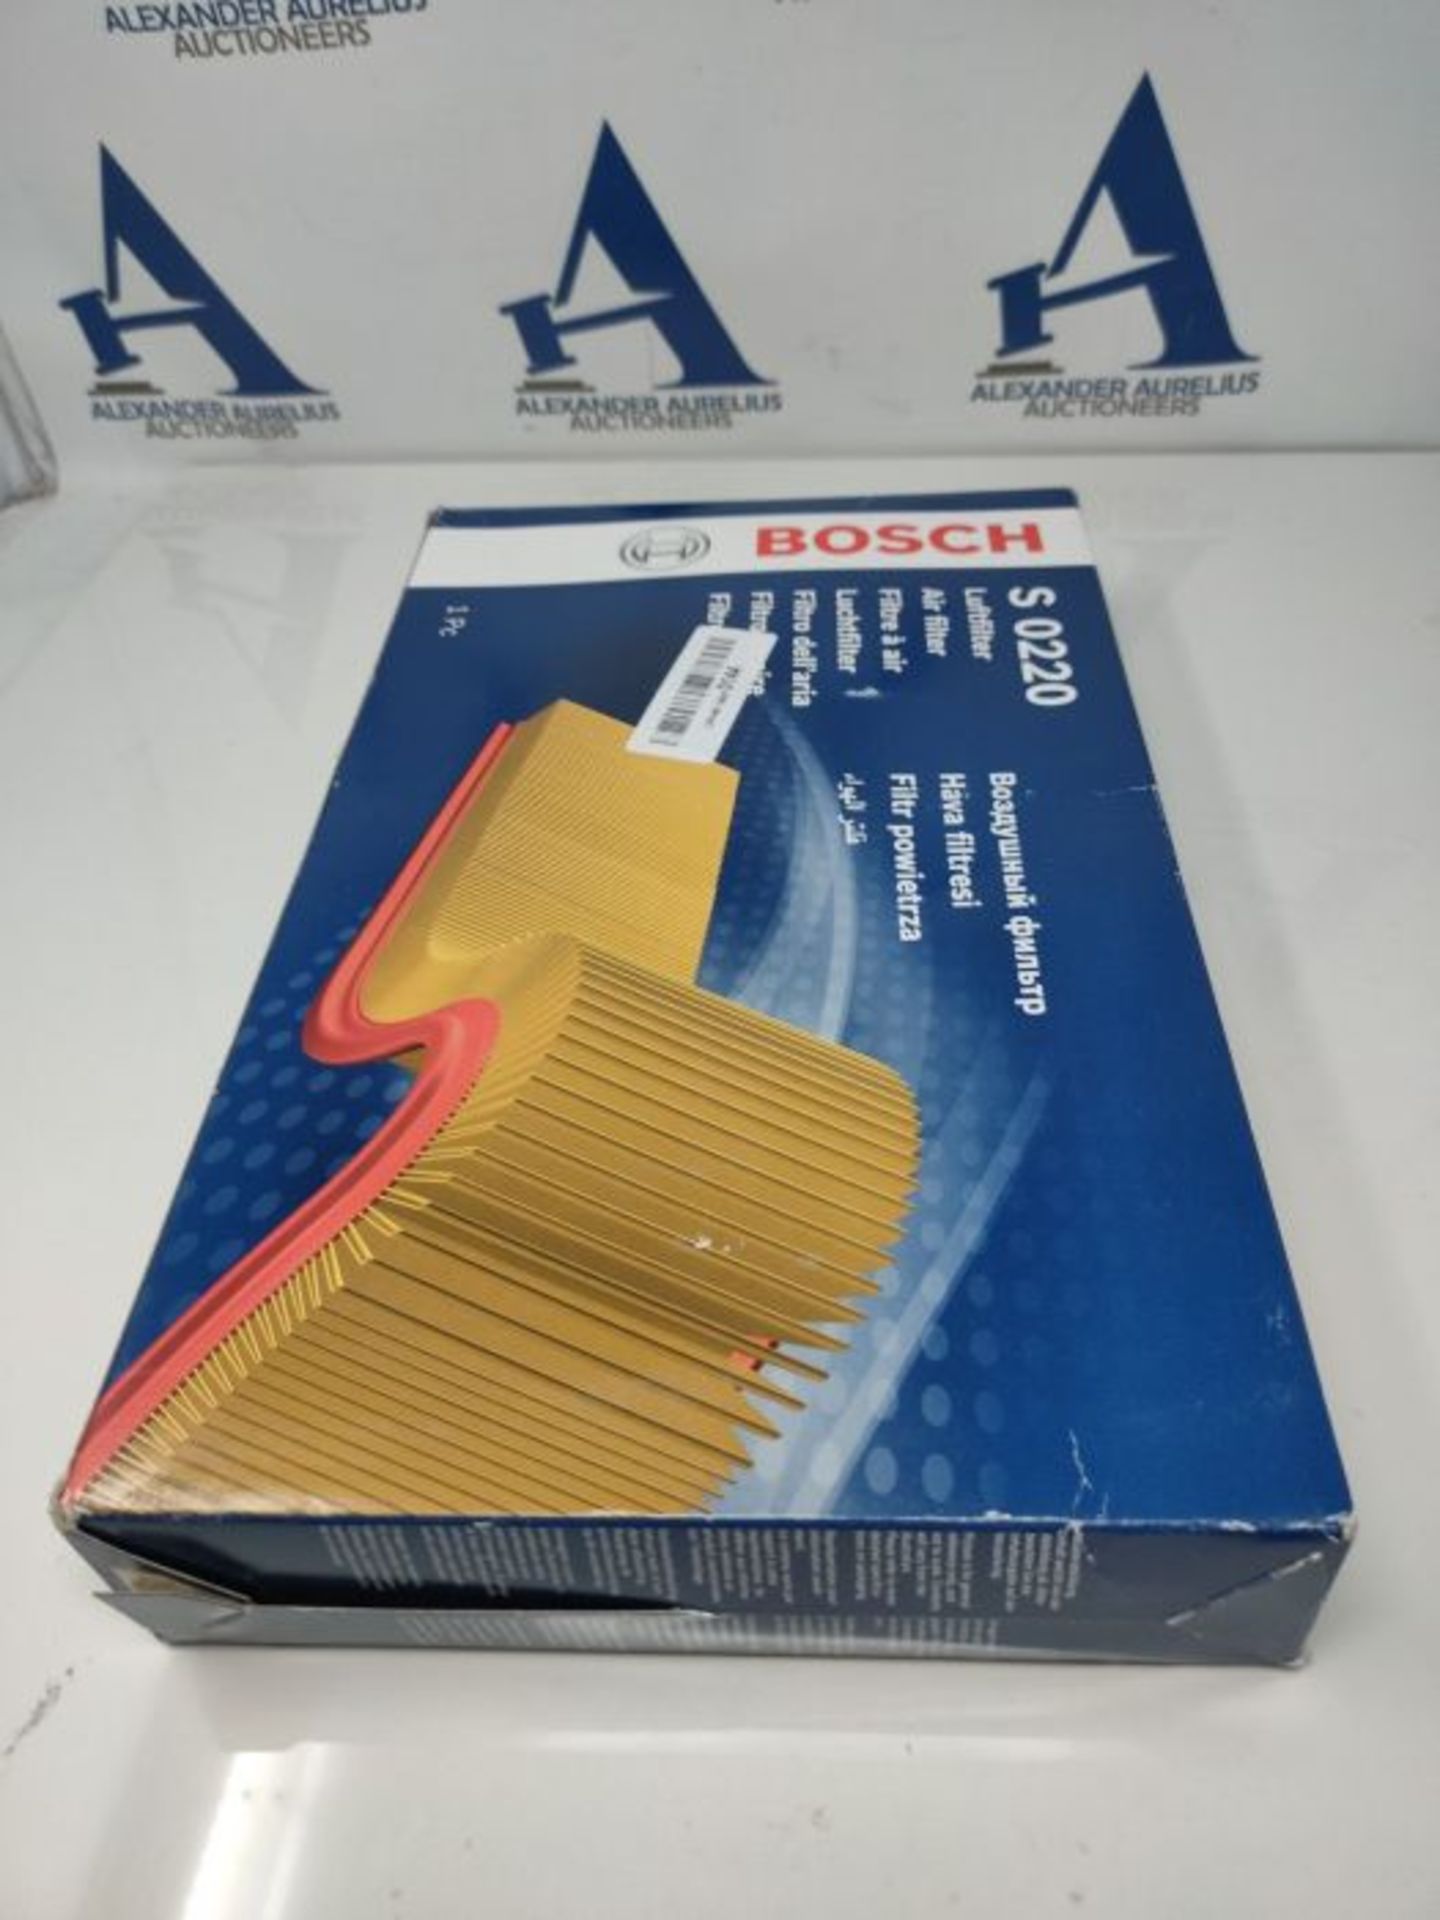 Bosch S0220 - Air Filter Car - Image 2 of 6